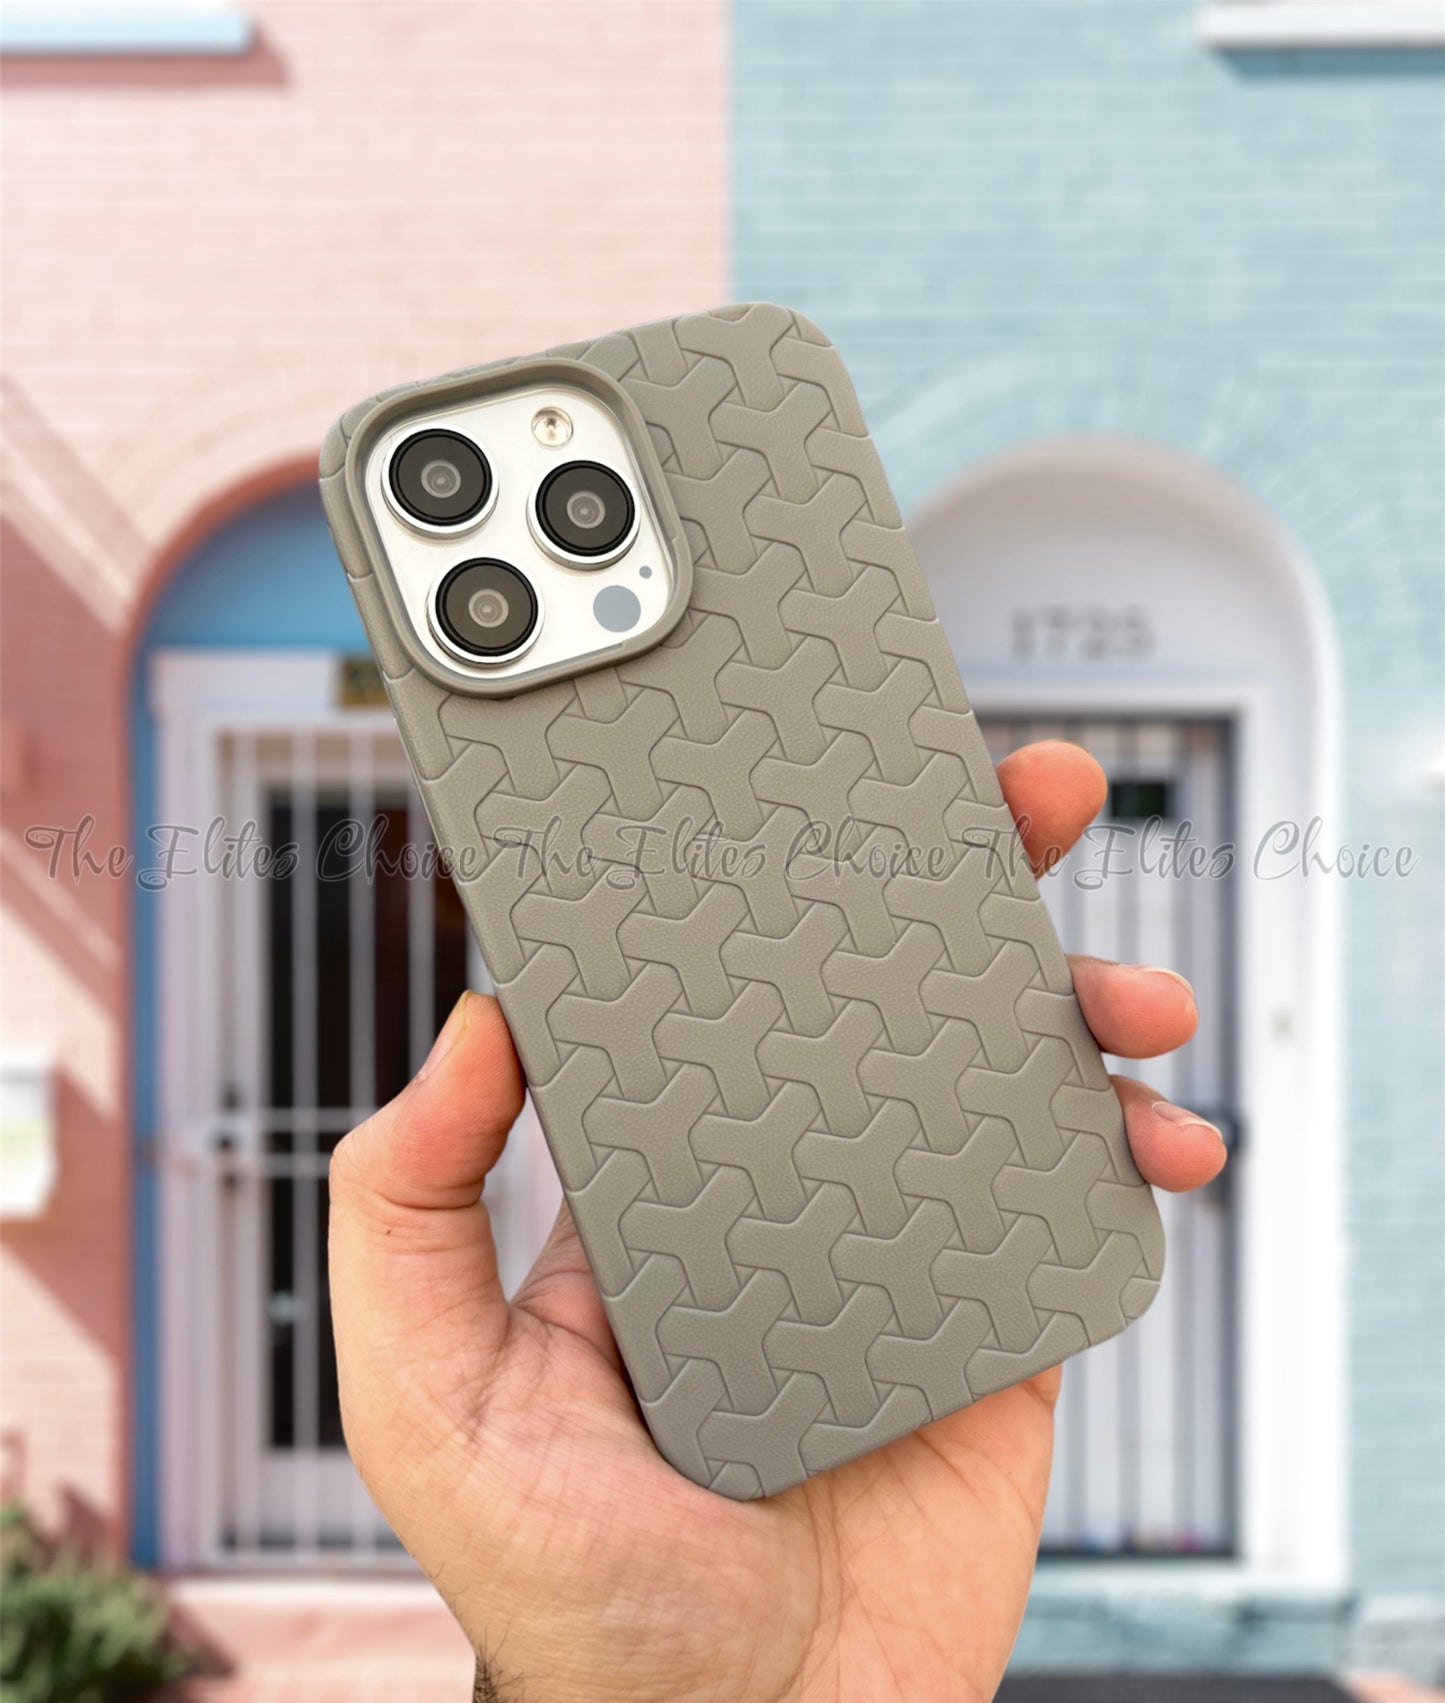 Wooven iPhone case